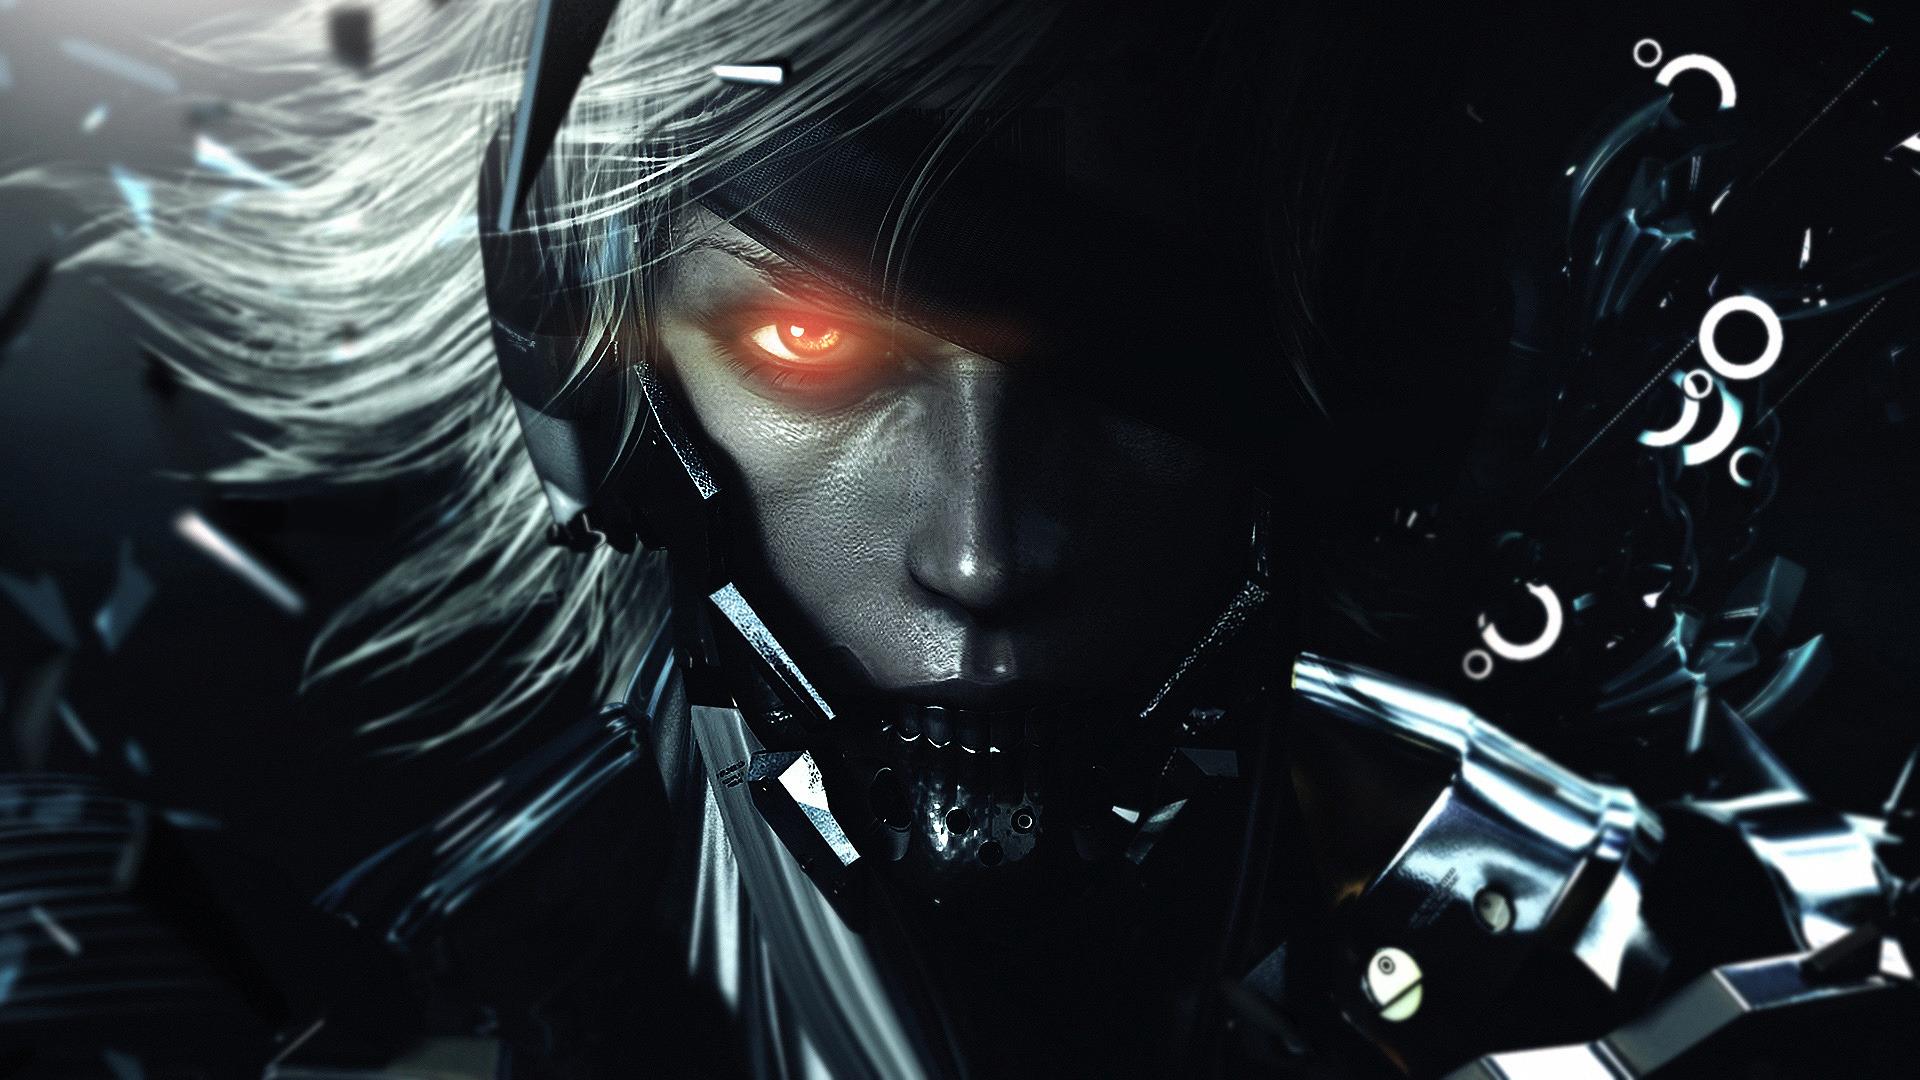 1920 x 1080 · jpeg - High resolution image of MGS, wallpaper of Raiden, Metal Gear Solid ...